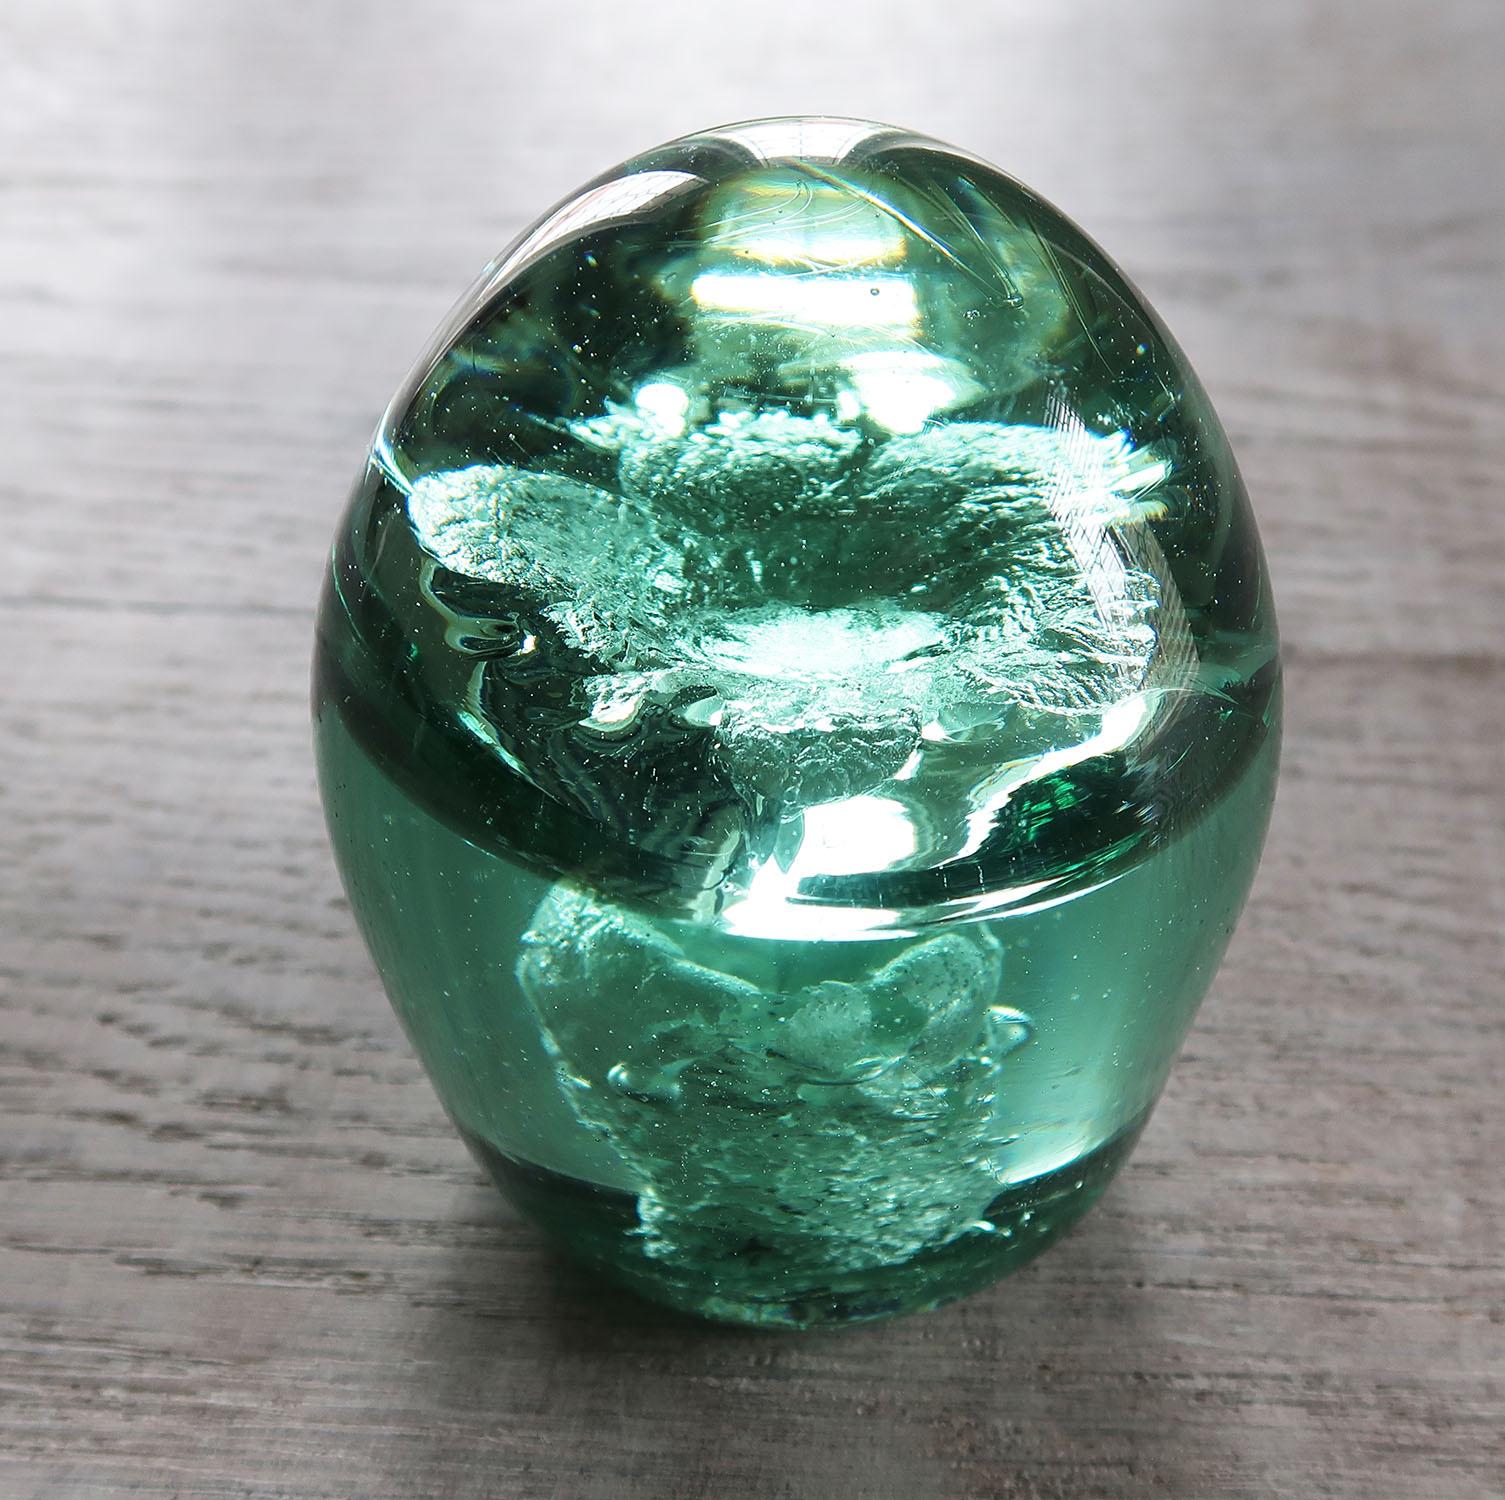 Victorian Small Antique Green Glass Sculpture, English, Late 19th Century